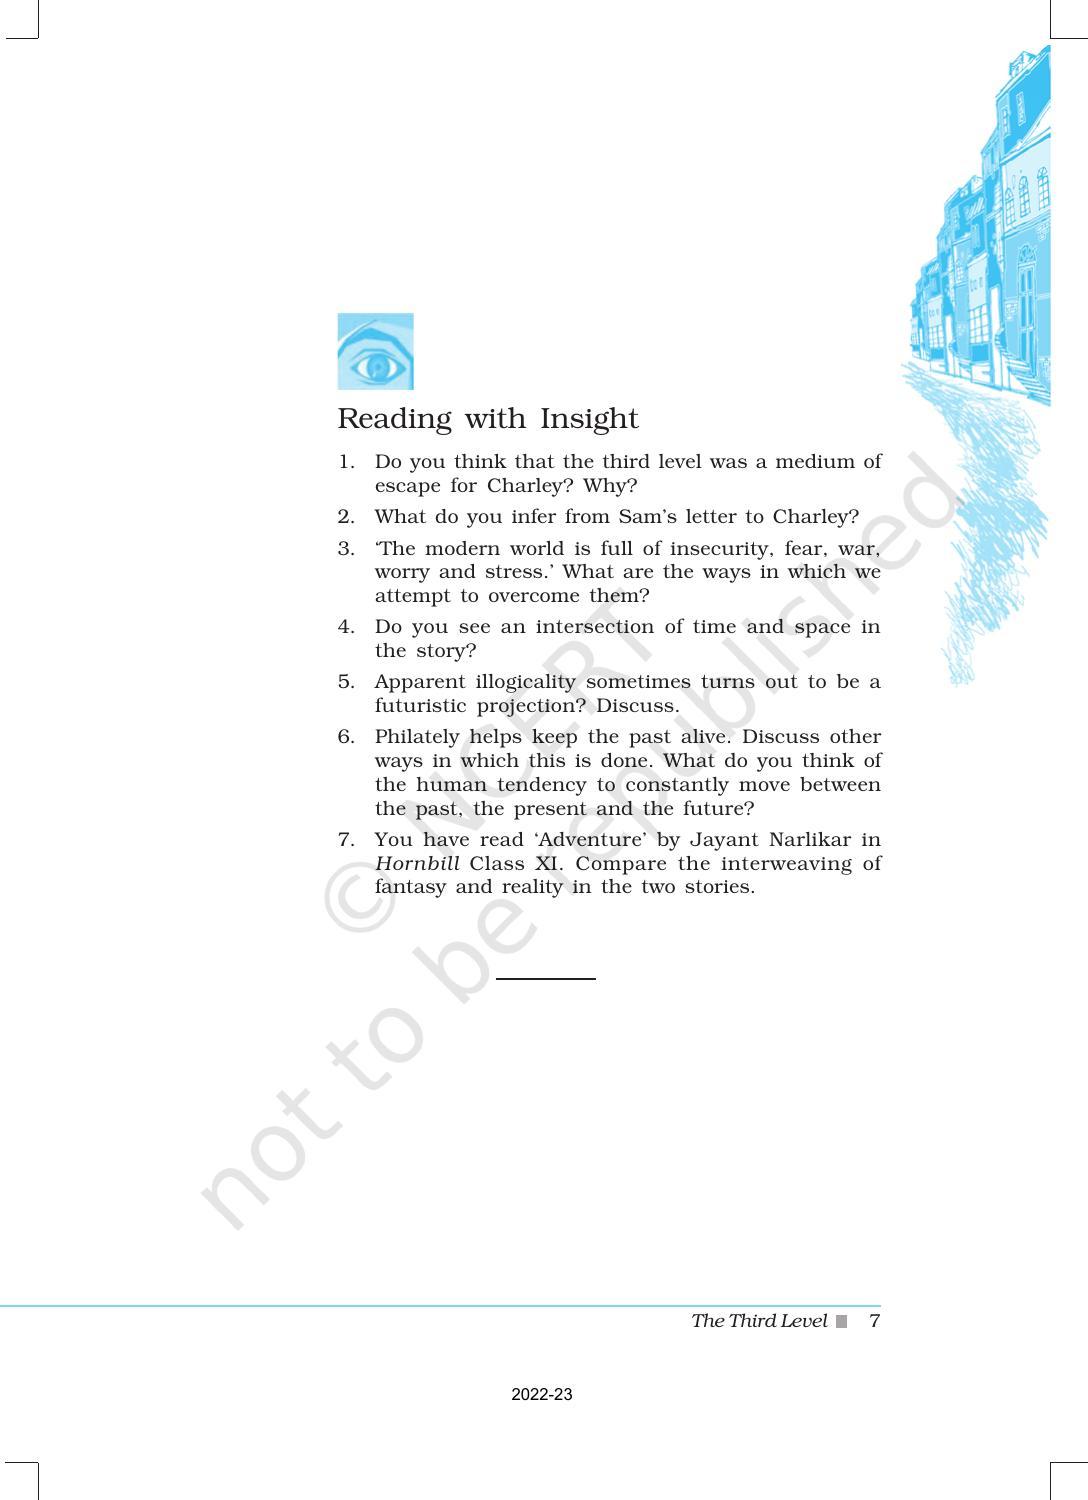 NCERT Book for Class 12 English Chapter 1 The Third Level - Page 7